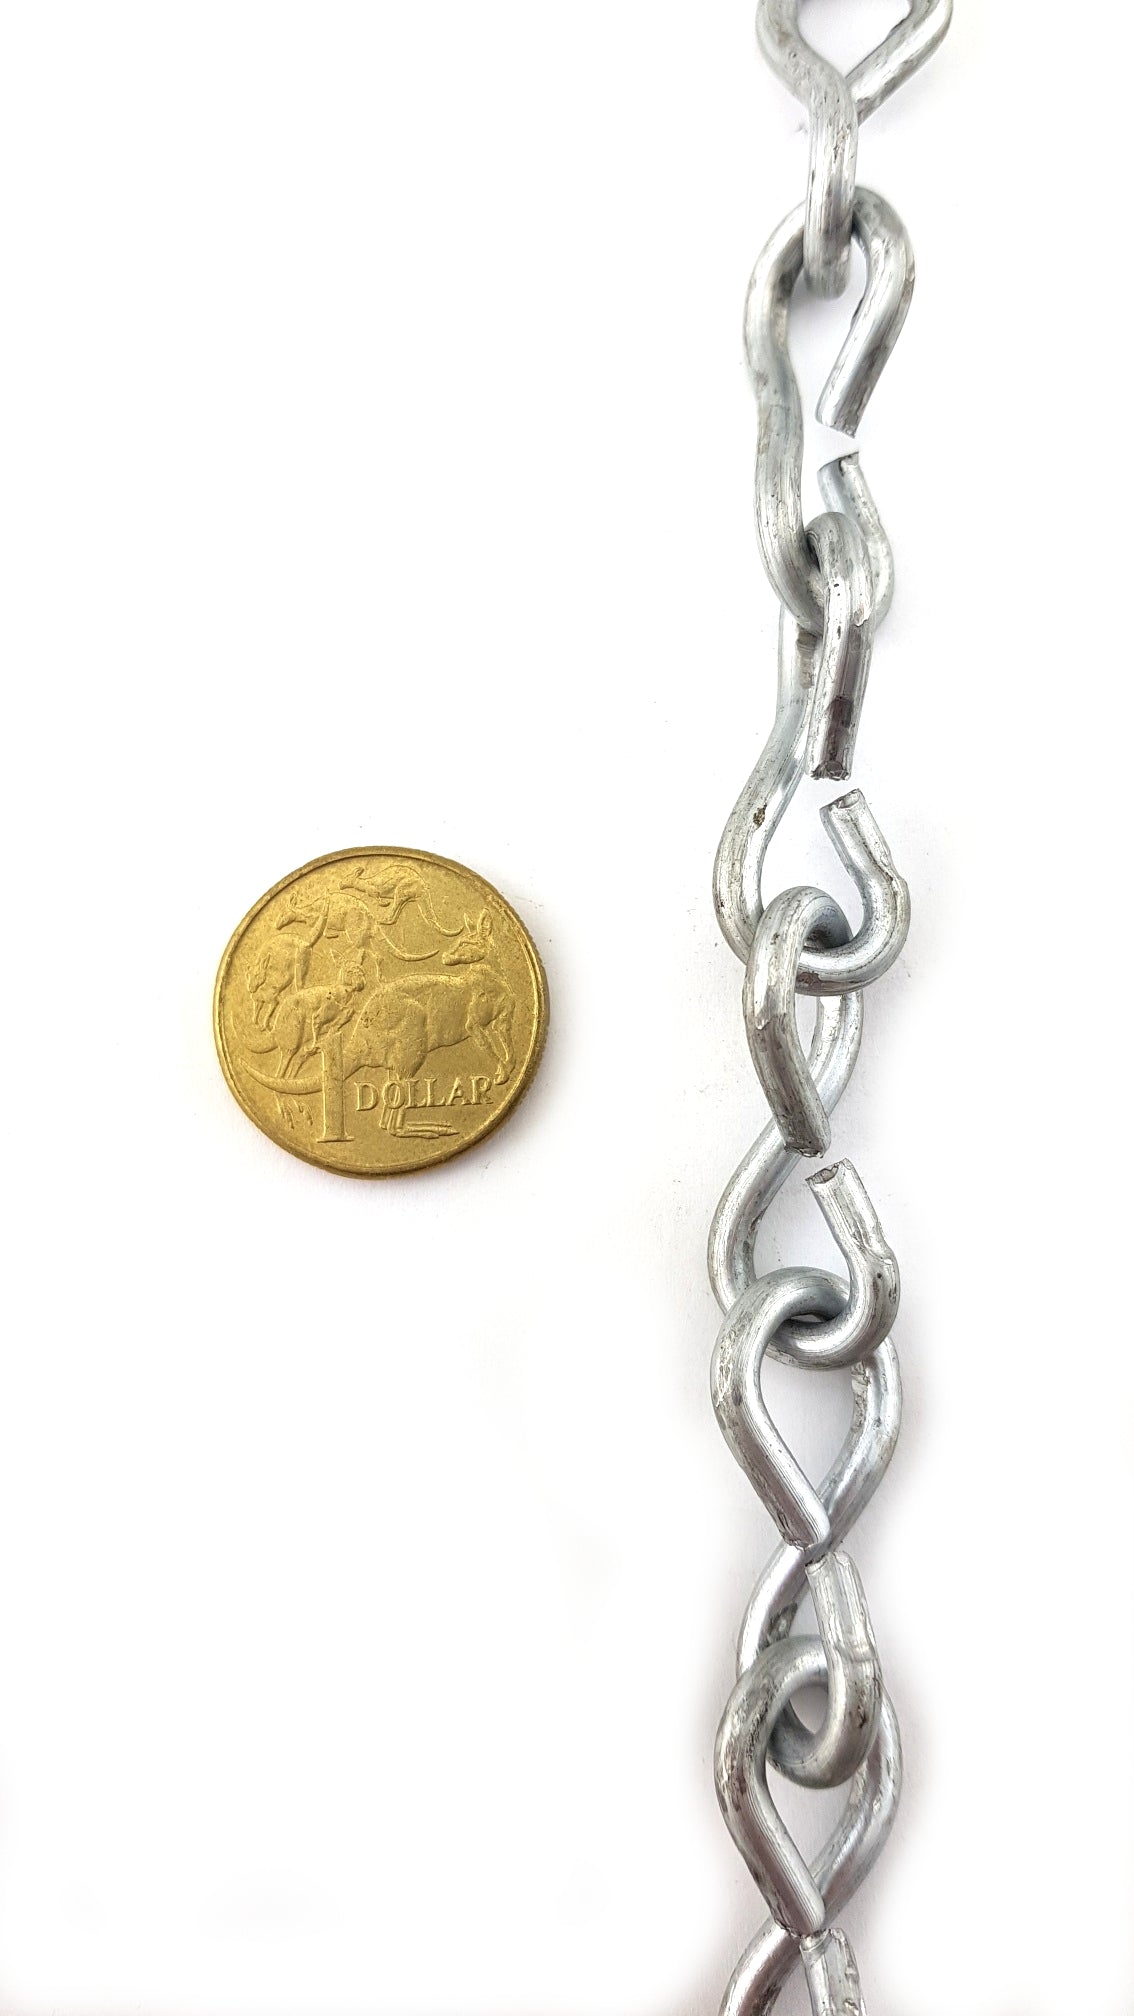 Australian made Single Jack Chain in galvanised finish, size 3.15mm and quantity of 30 metres. Melbourne, Australia.